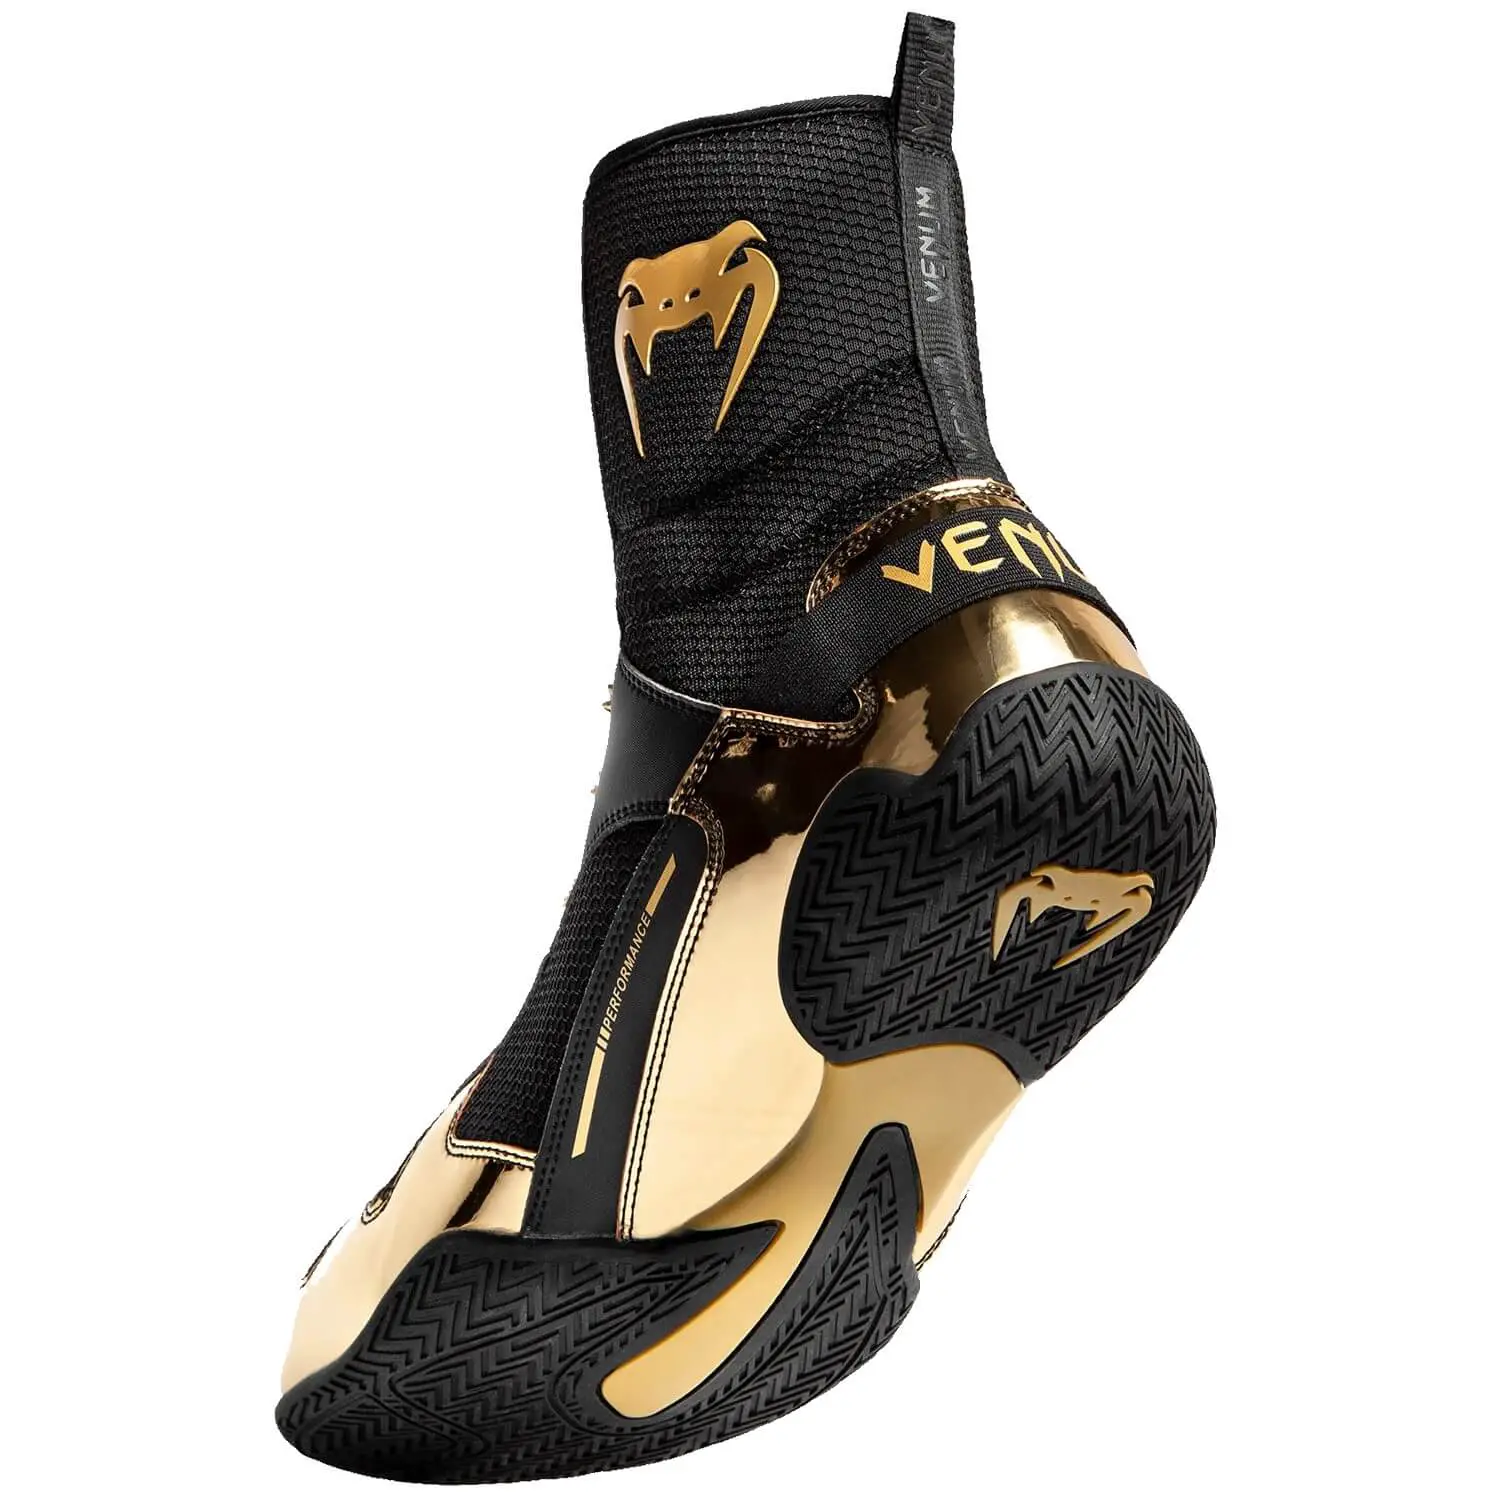 Black and gold Venum Elite rear shot showing upper and outsole